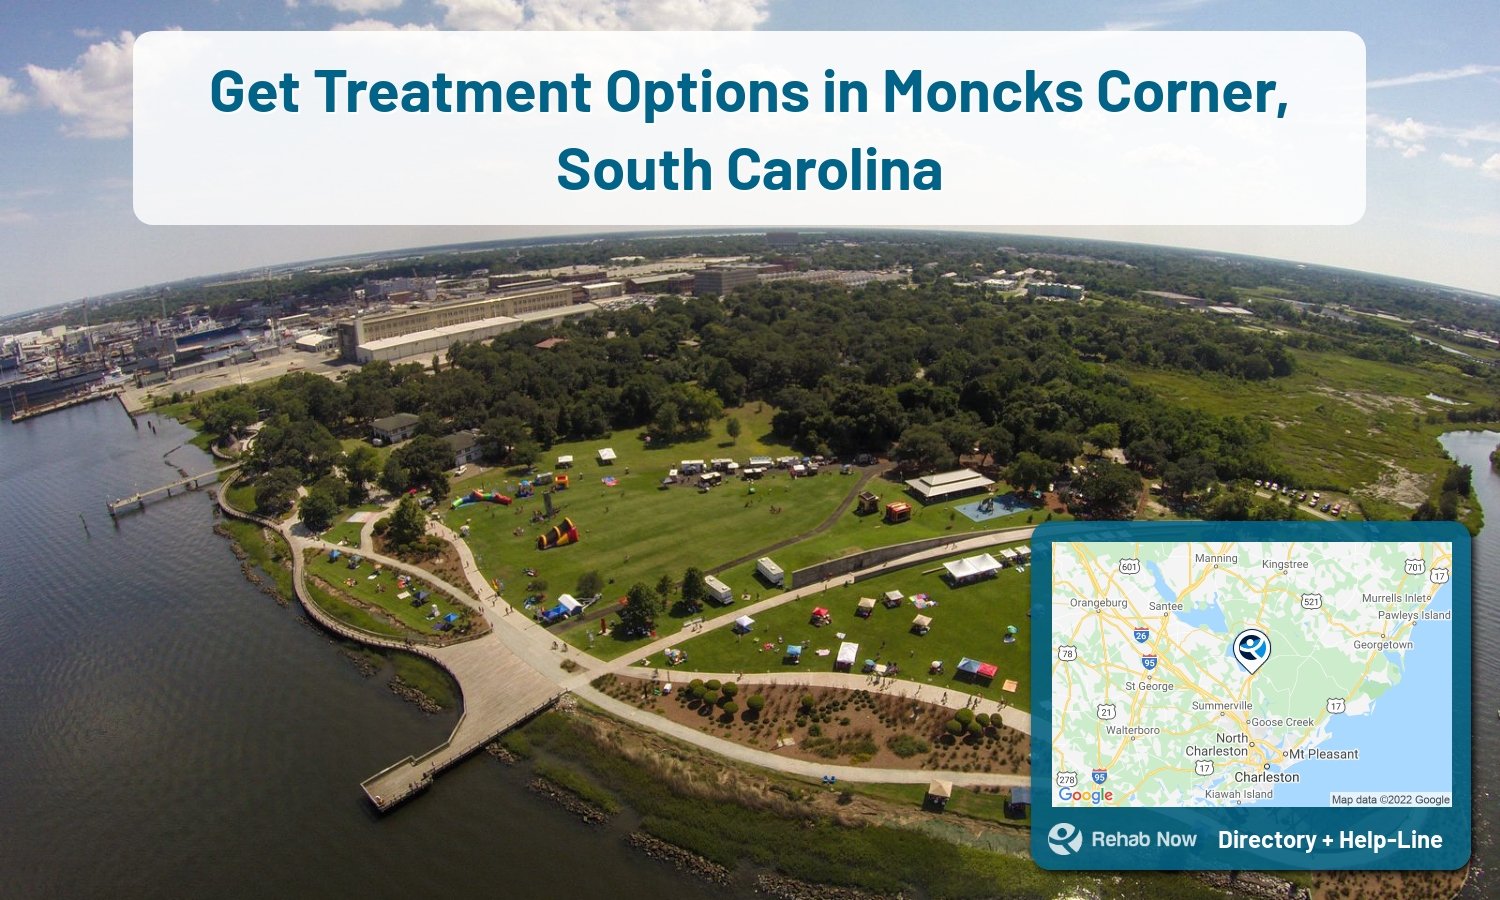 View options, availability, treatment methods, and more, for drug rehab and alcohol treatment in Moncks Corner, South Carolina